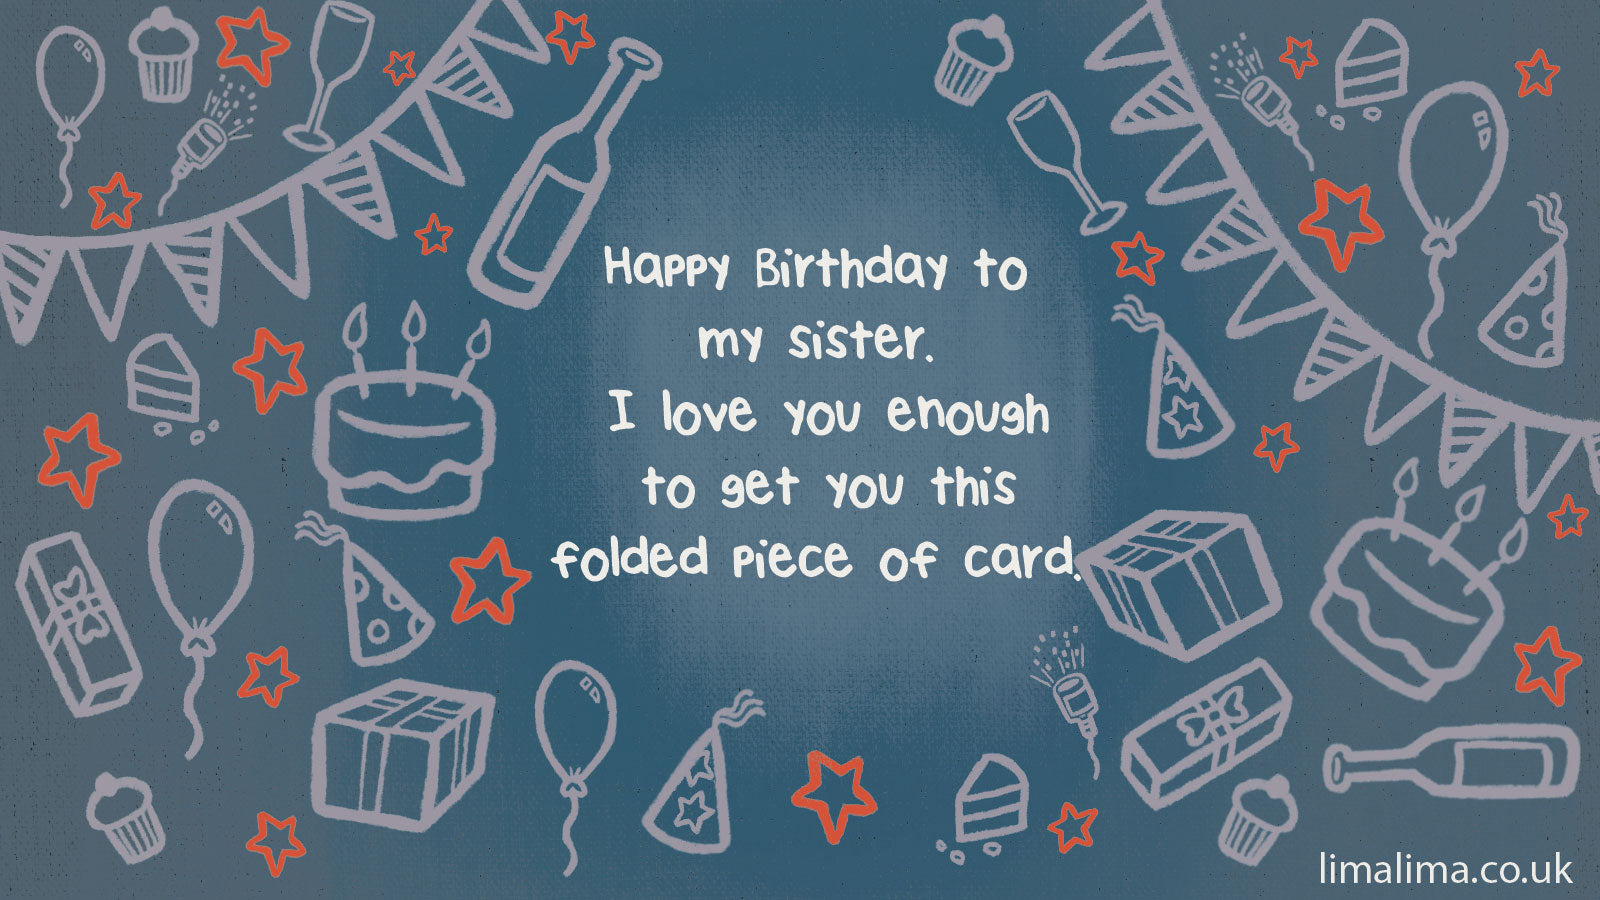 birthday wishes for sister quotes